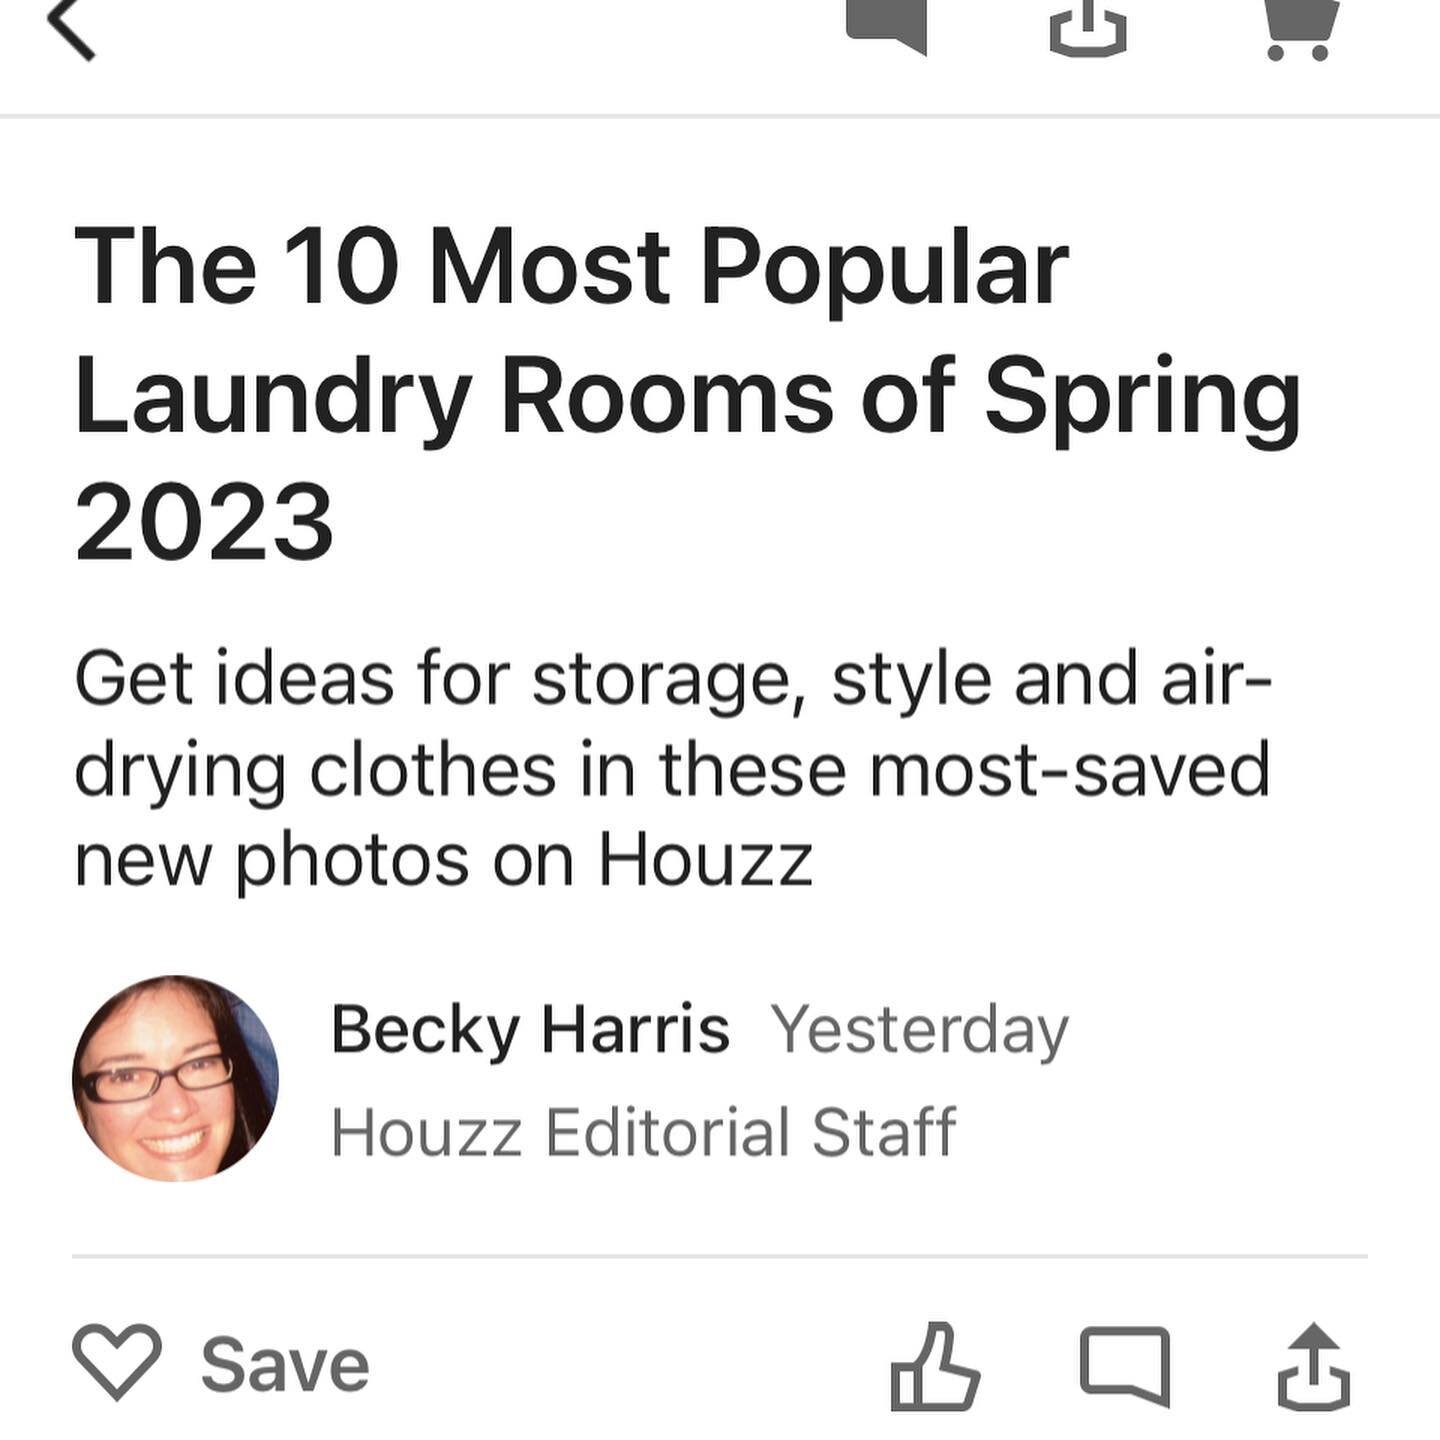 Thank you @houzz for featuring our #BlackCroweModernFarmhouse project in &ldquo;The 10 Most Popular Laundry Rooms of Spring 2023!&rdquo; 

Click below to read the full article and for some great laundry room inspo! 

bit.ly/3PGCMzB
.
.
.
#holleyandco